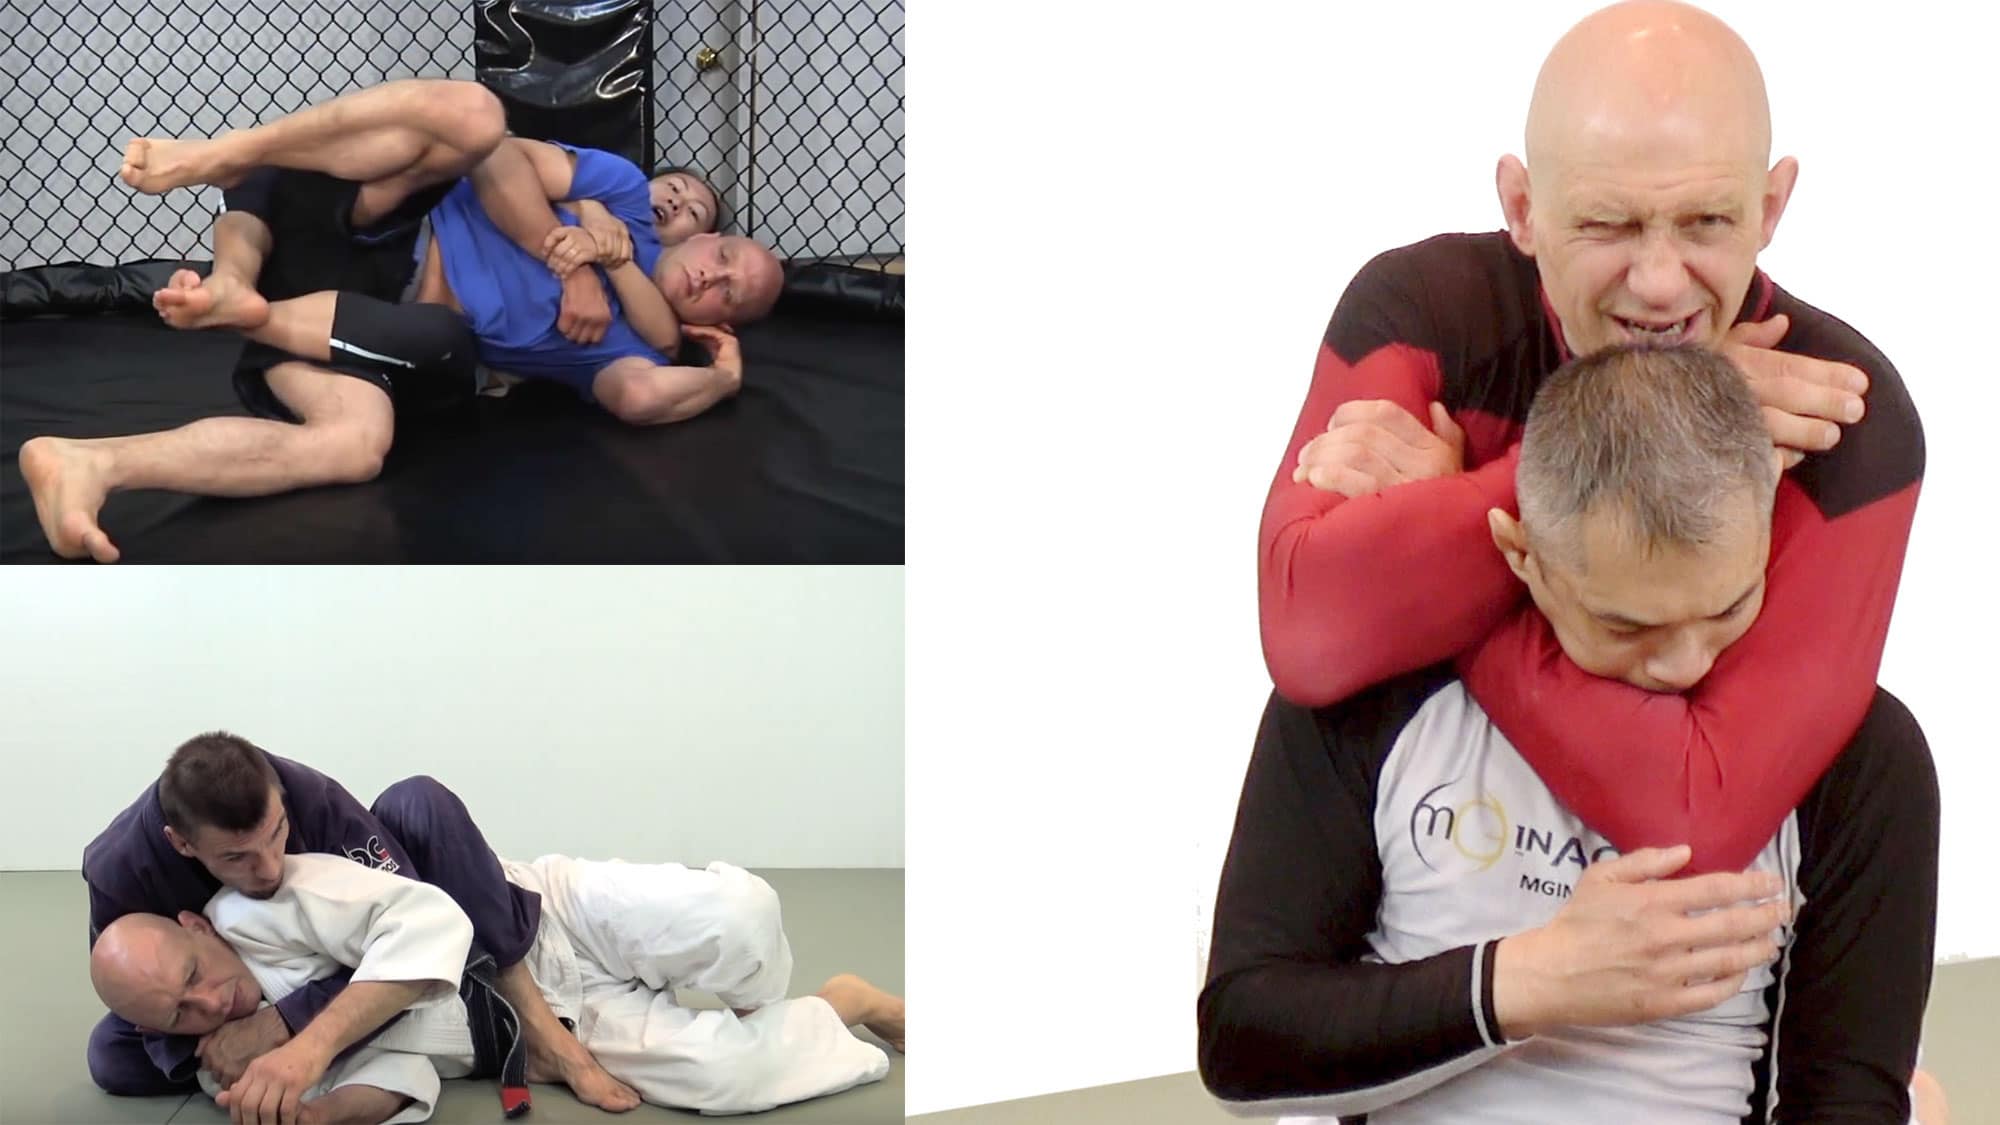 Submission Series: Rear Naked Choke